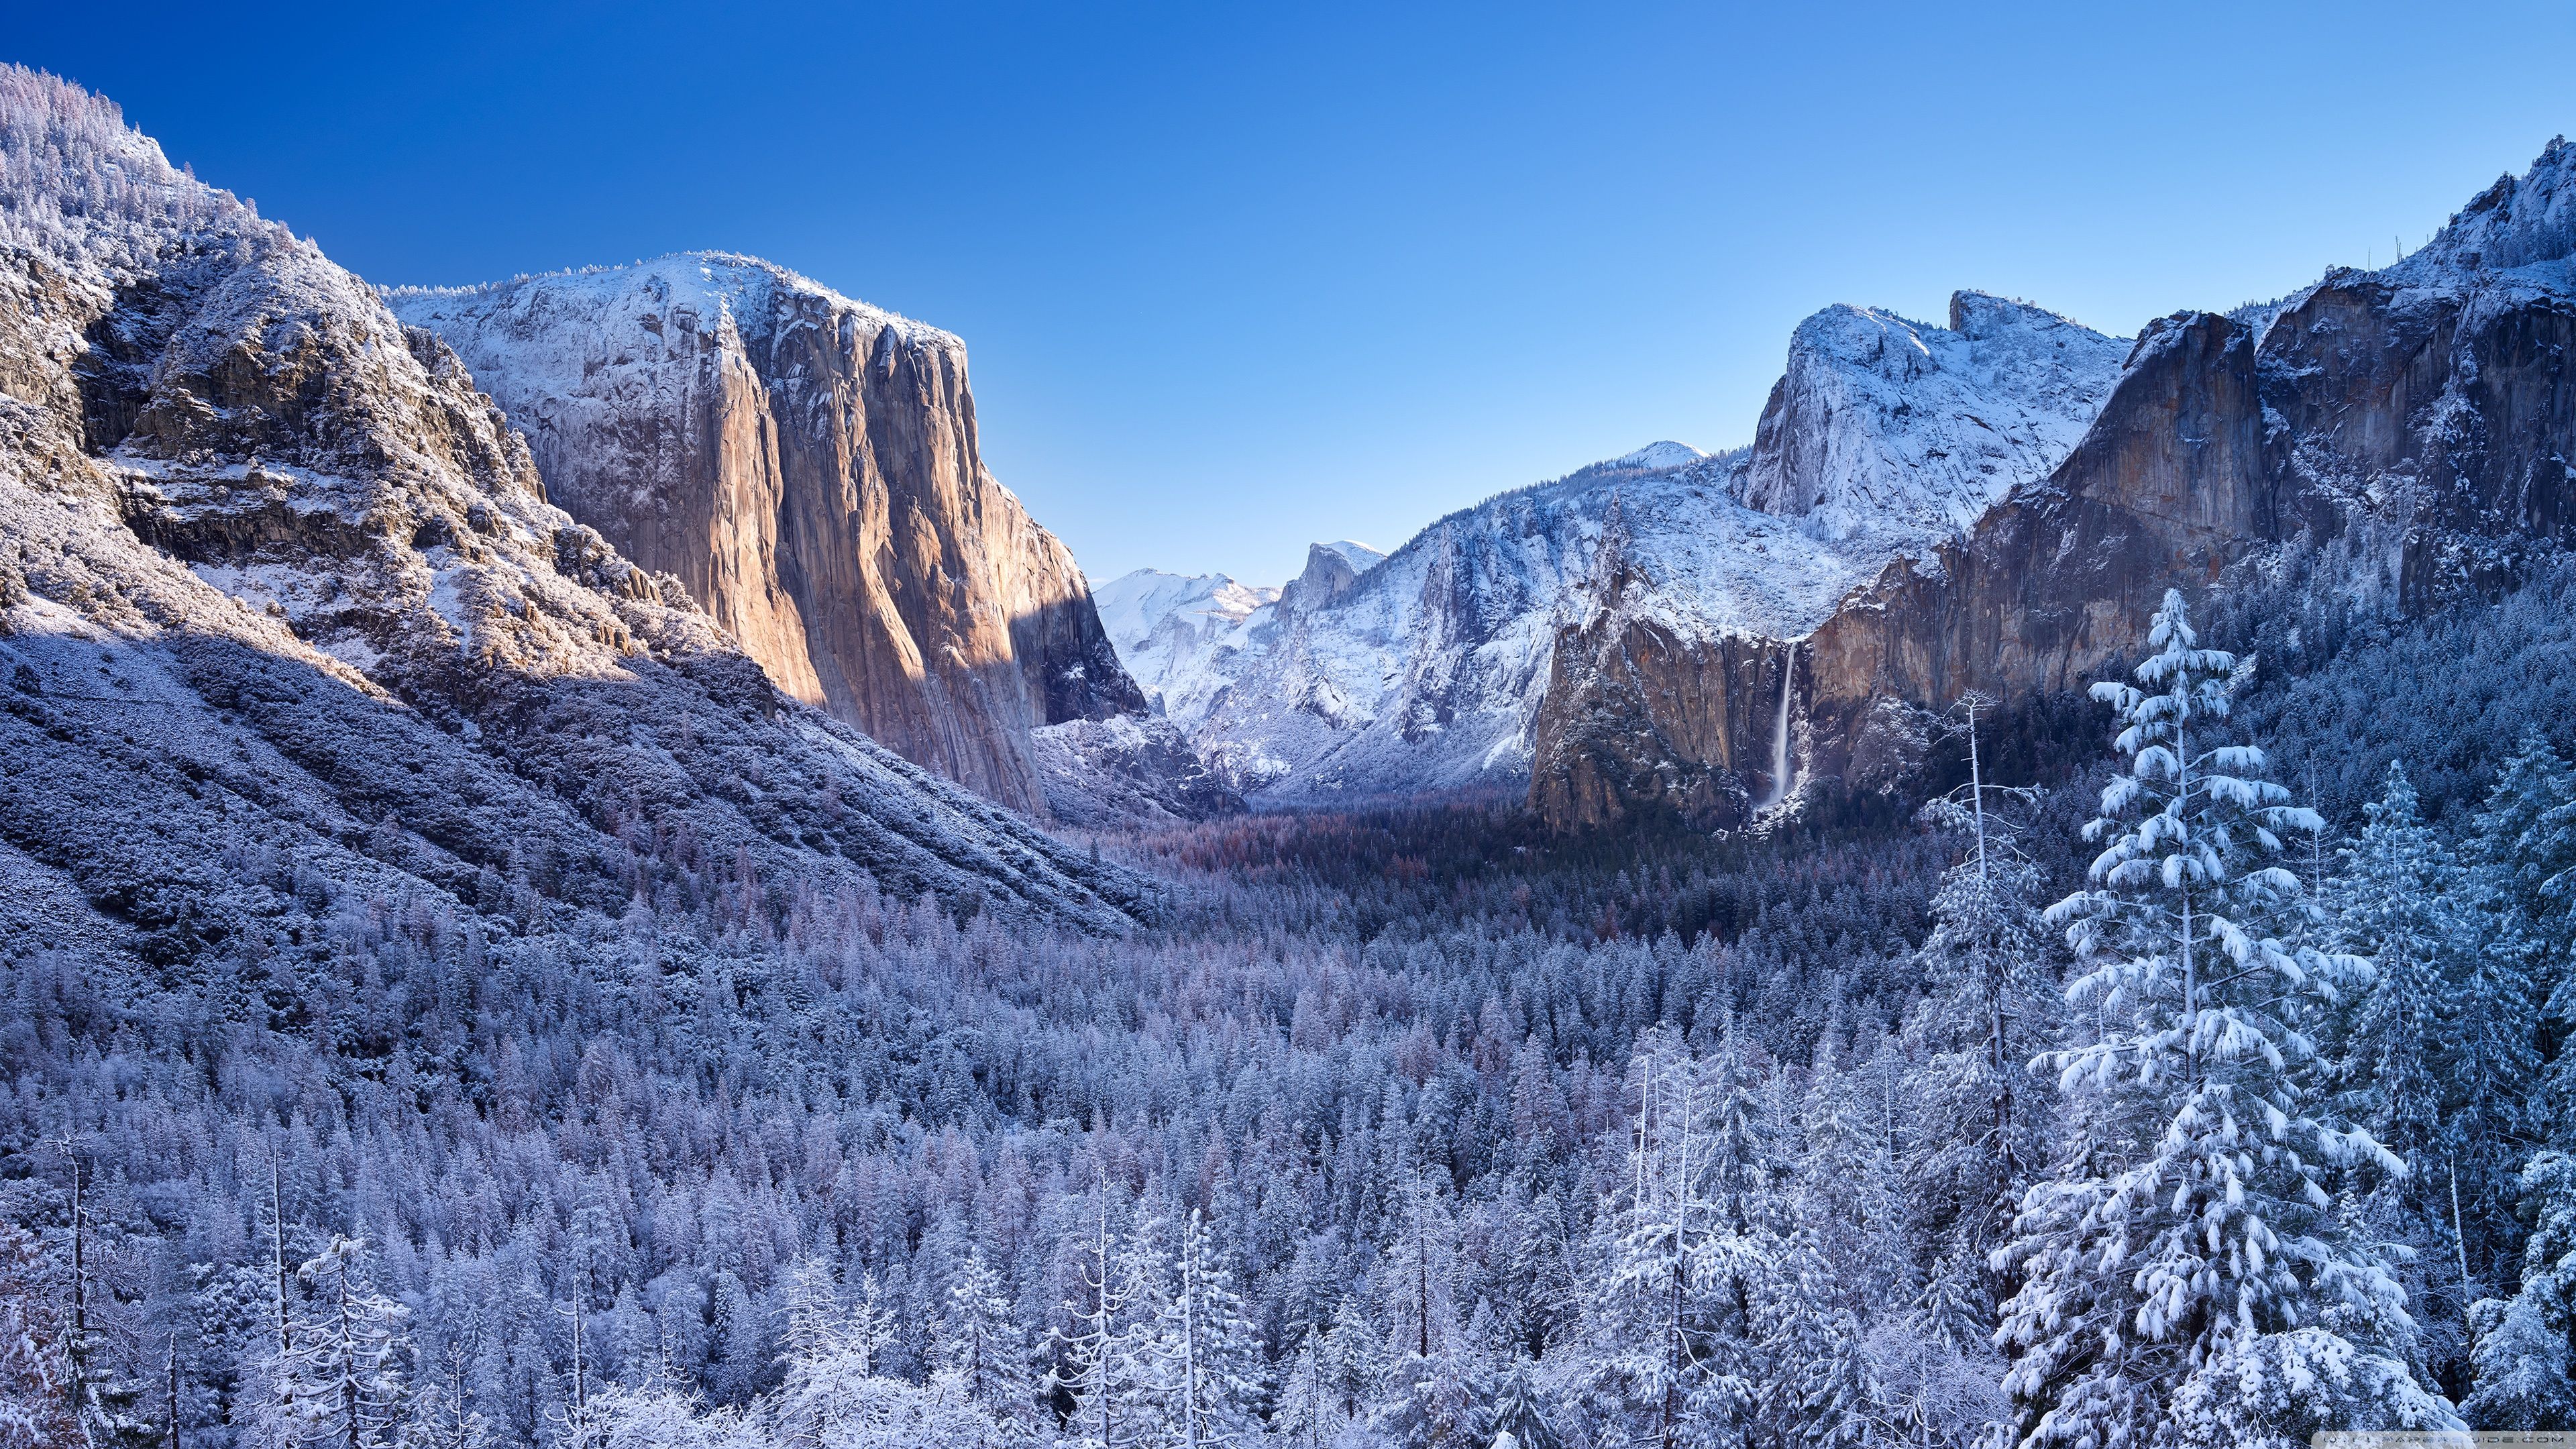 Yosemite 4K wallpaper for your desktop or mobile screen free and easy to download